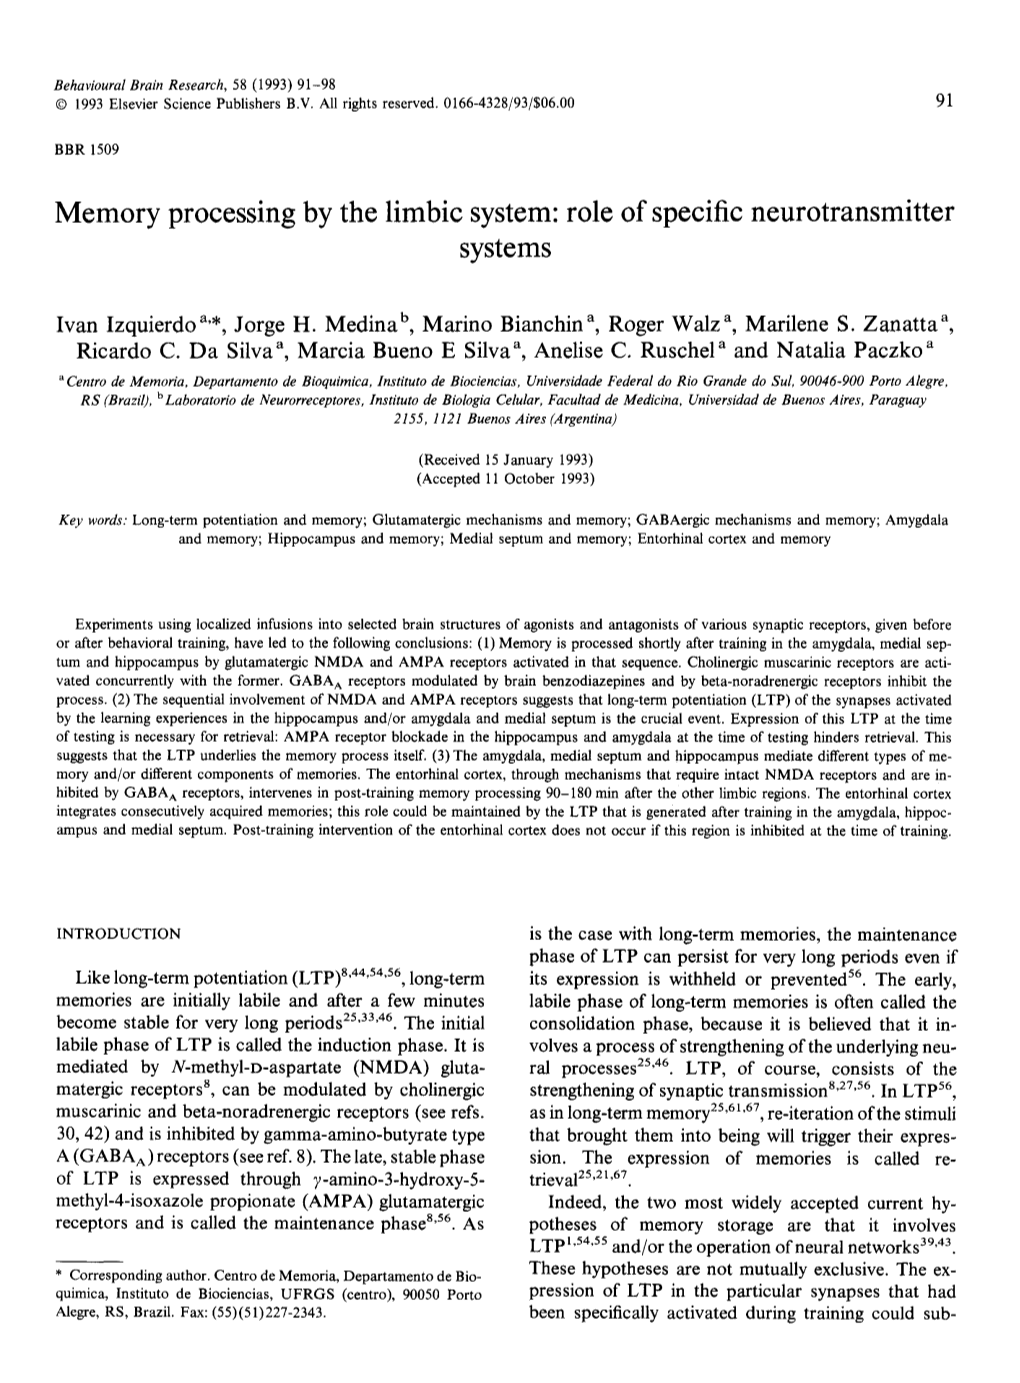 Memory Processing by the Limbic System: Role of Specific Neurotransmitter Systems